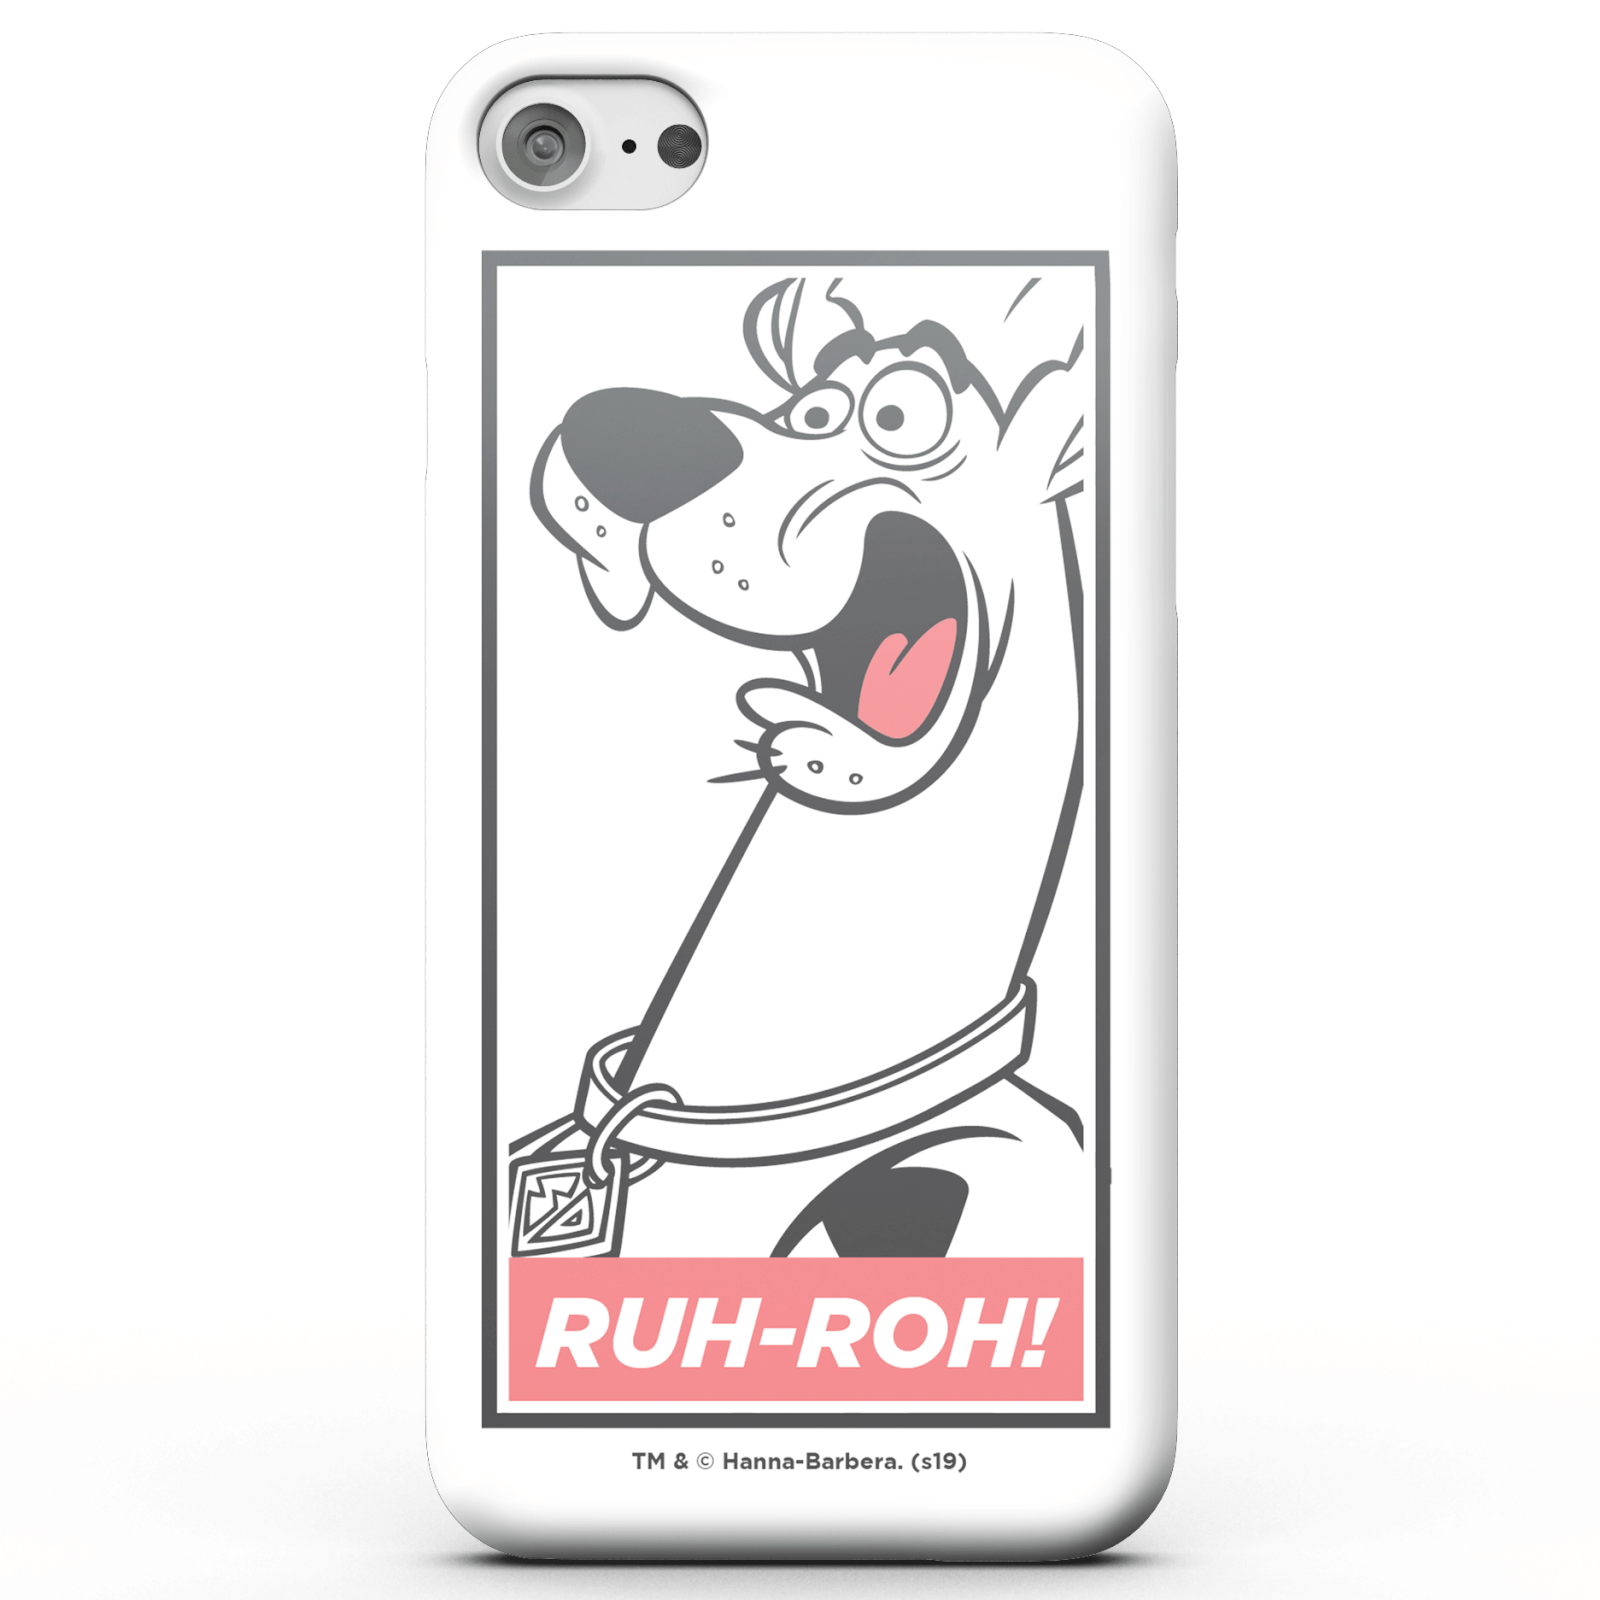 Scooby Doo Ruh-Roh! Phone Case for iPhone and Android - Samsung S6 Edge Plus - Snap Case - Gloss